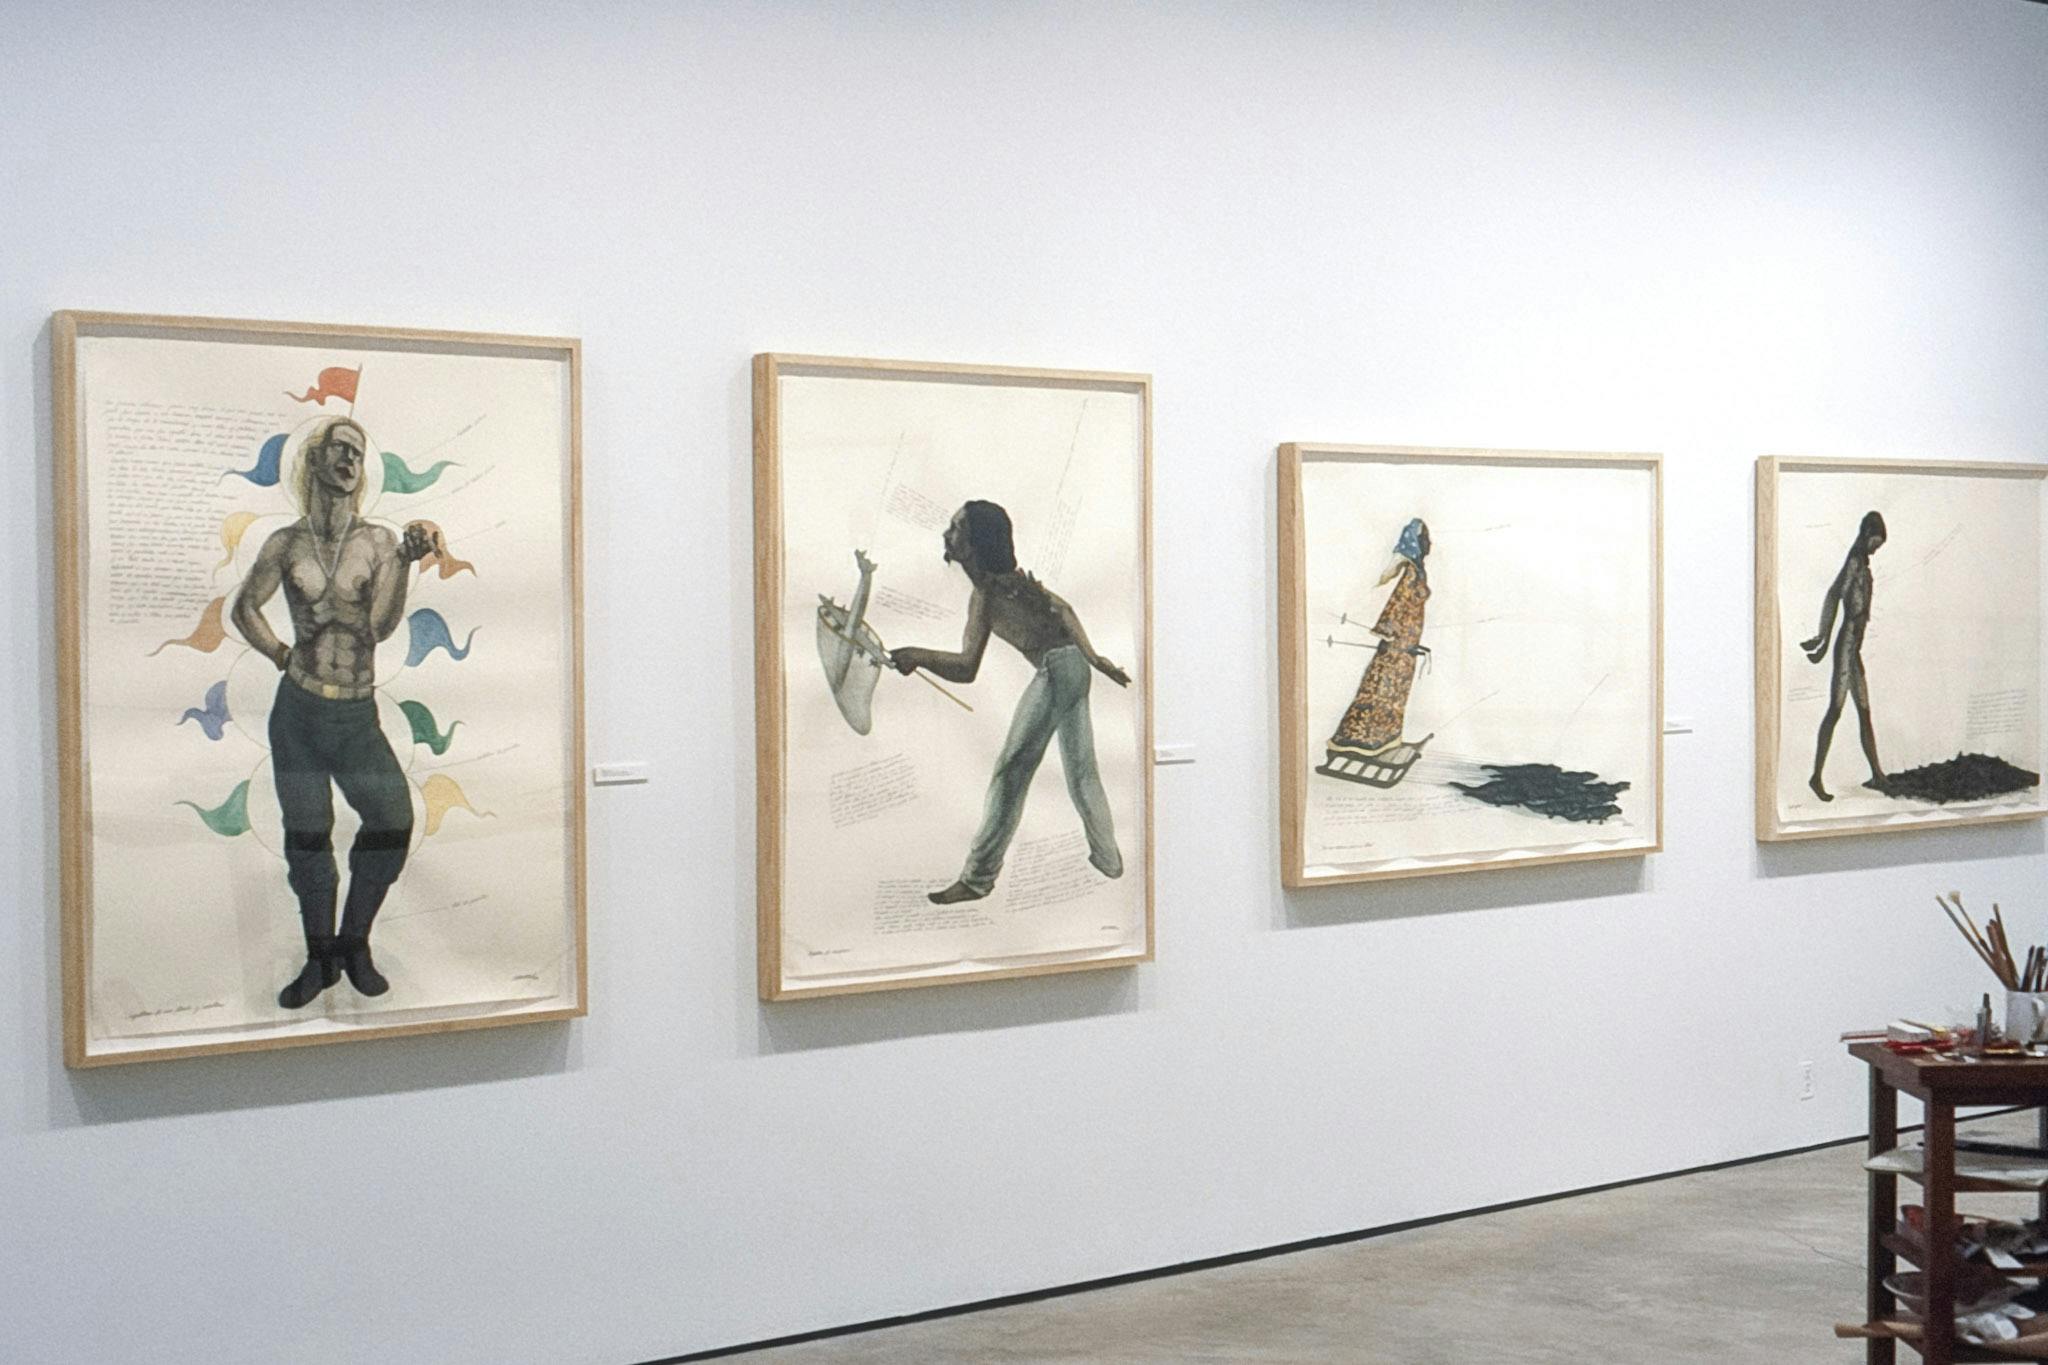 Four paintings of black-skinned people are installed on the gallery wall. The one on the far left shows a person with a gender-neutral body wearing small colorful flags. Some texts are written on each piece. 